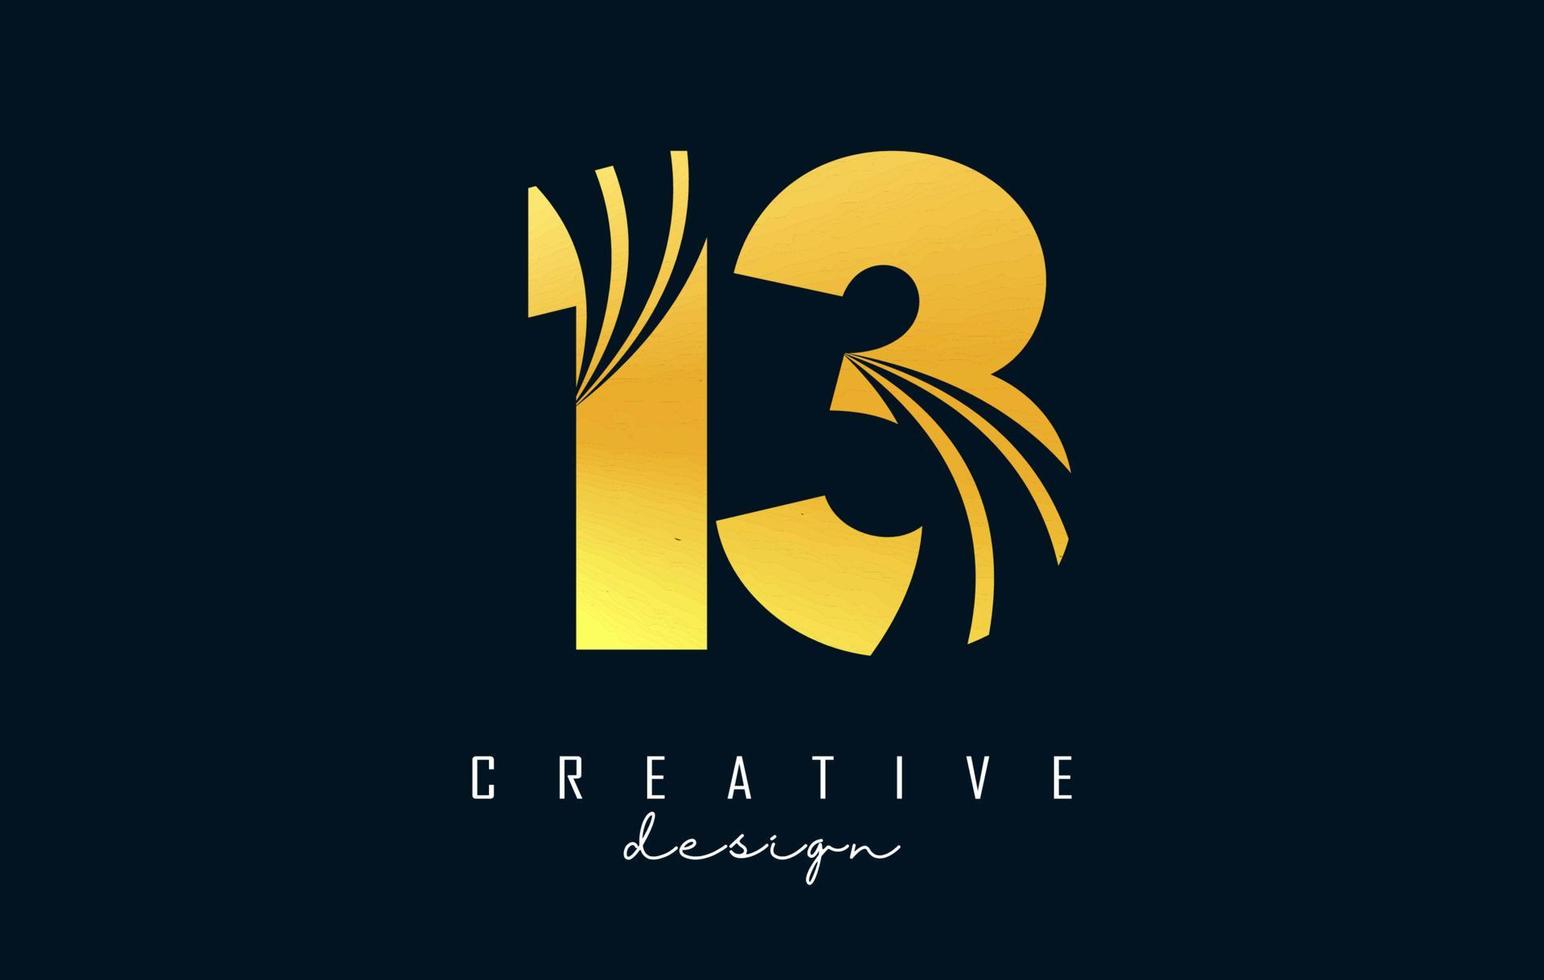 Golden Creative number 13 1 3 logo with leading lines and road concept design. Number with geometric design. vector